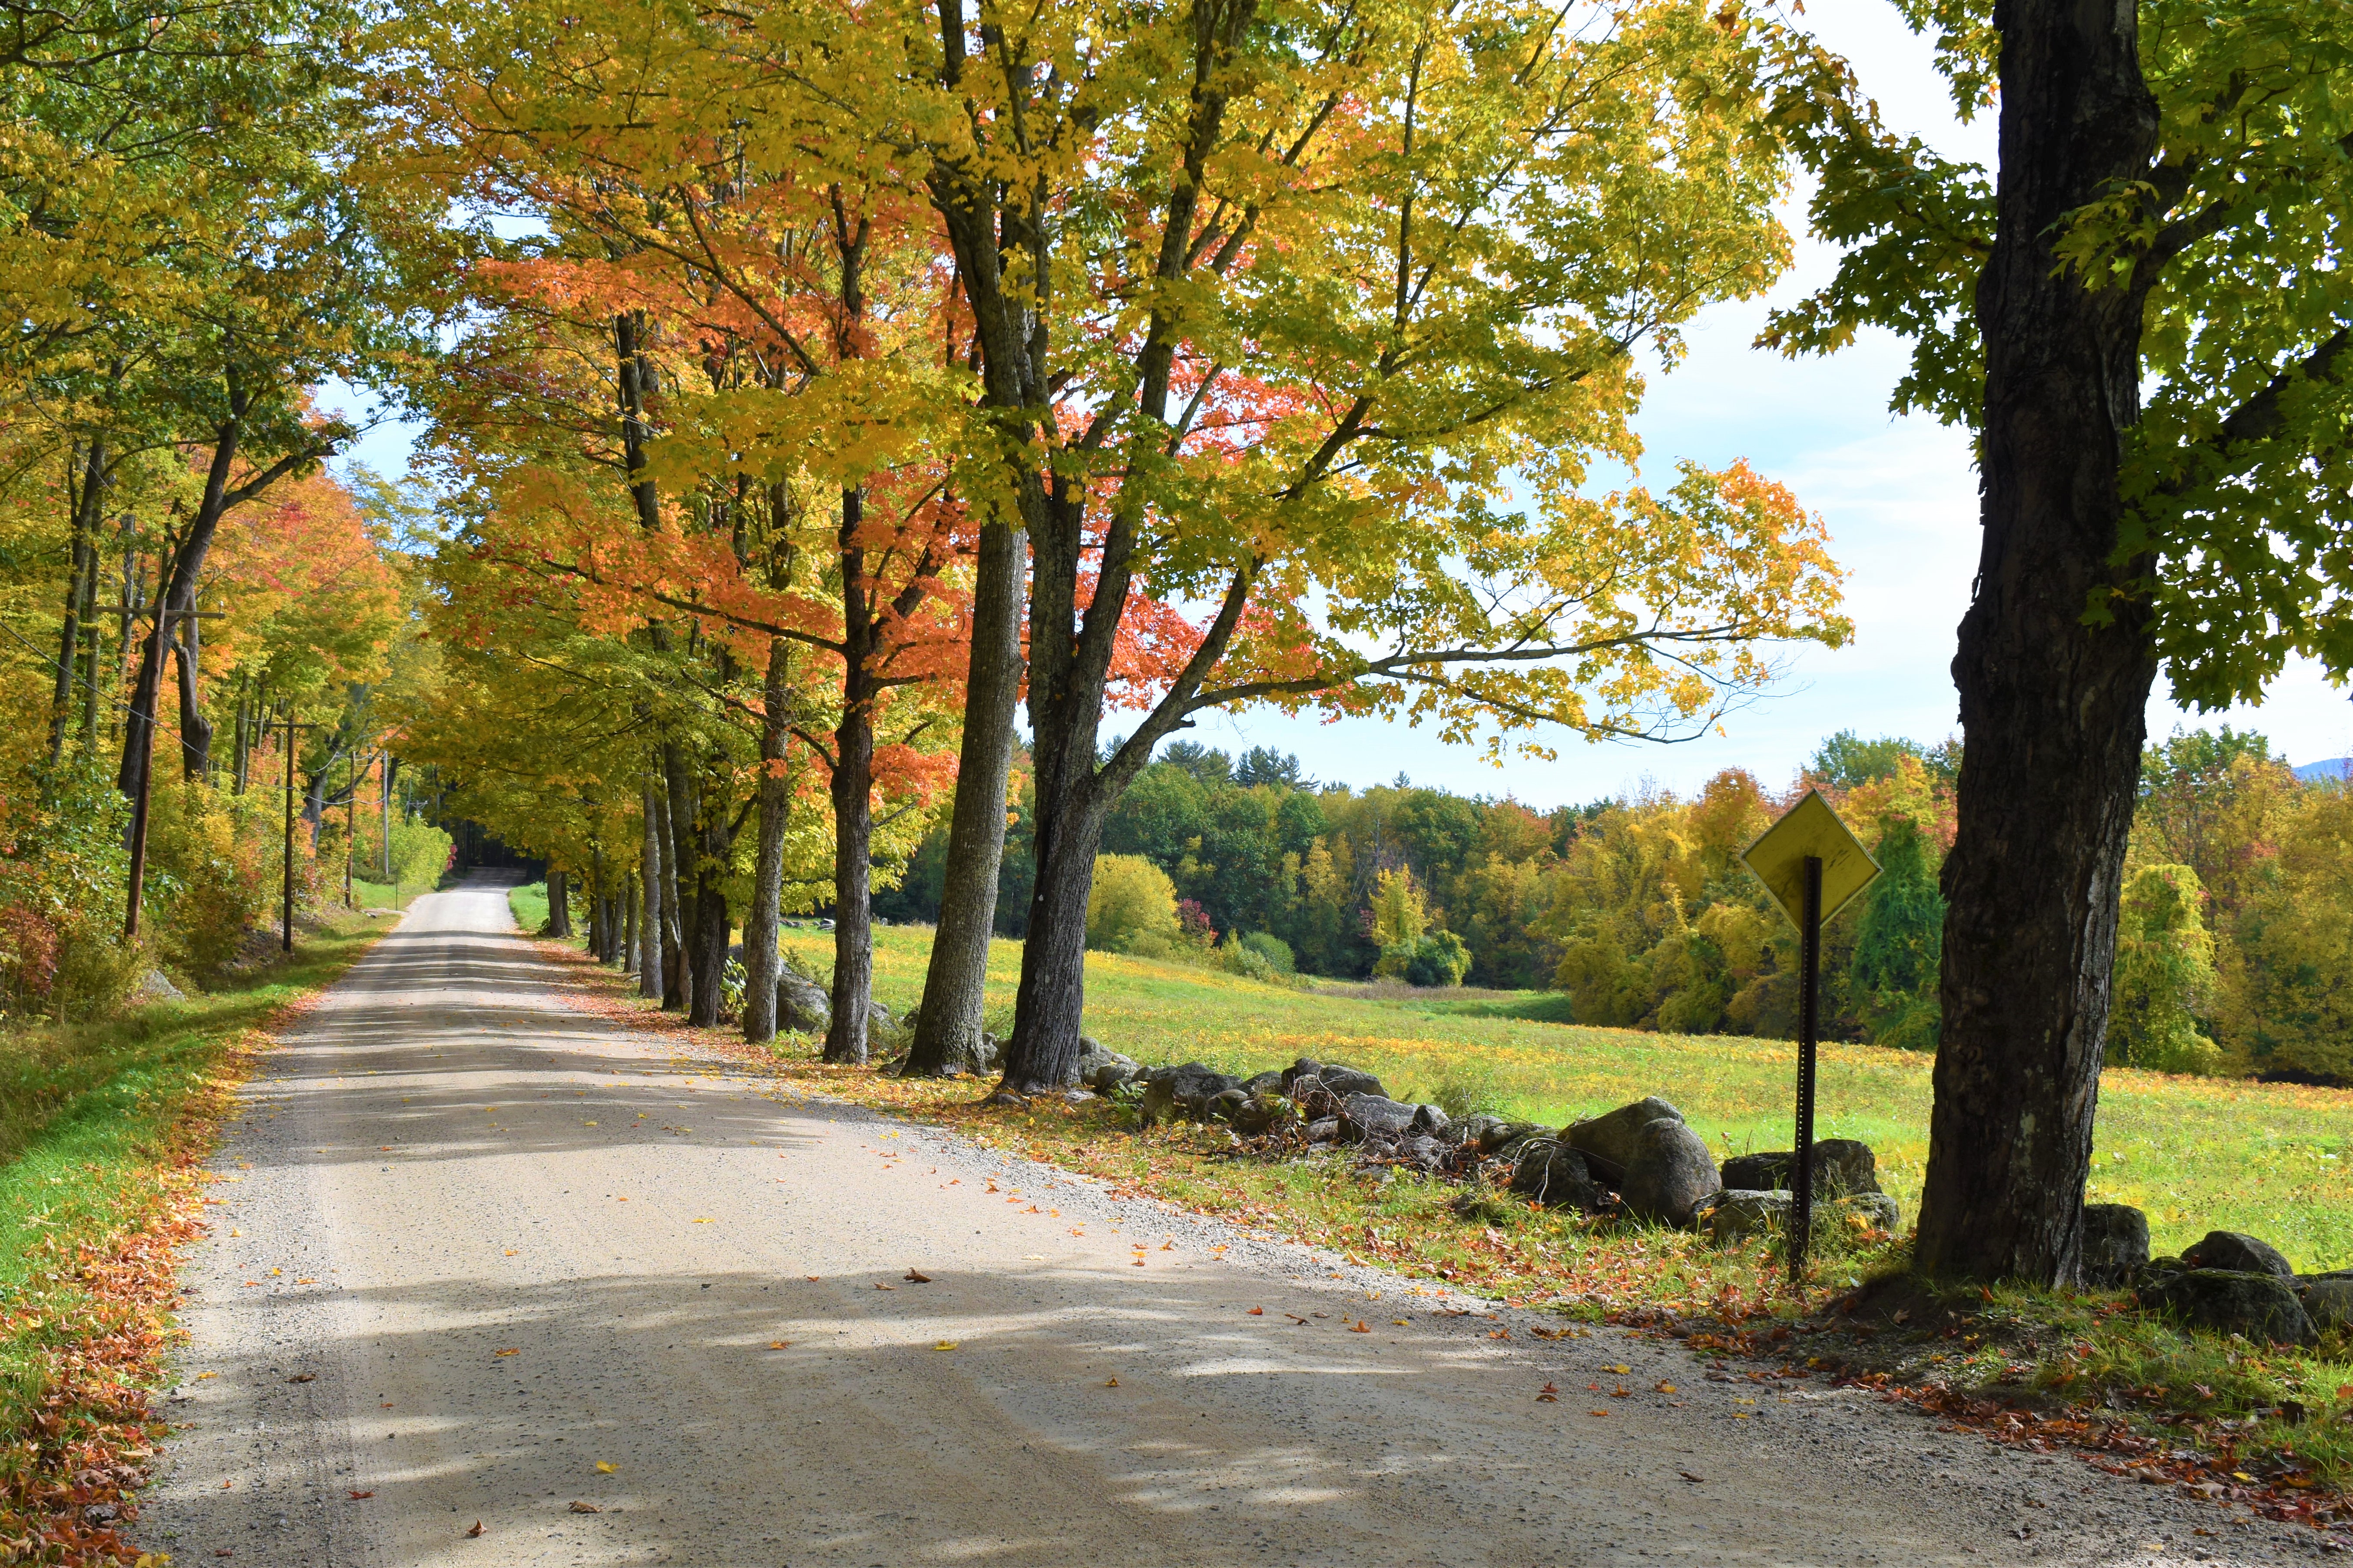 a dirt road next to a field with fall foliage